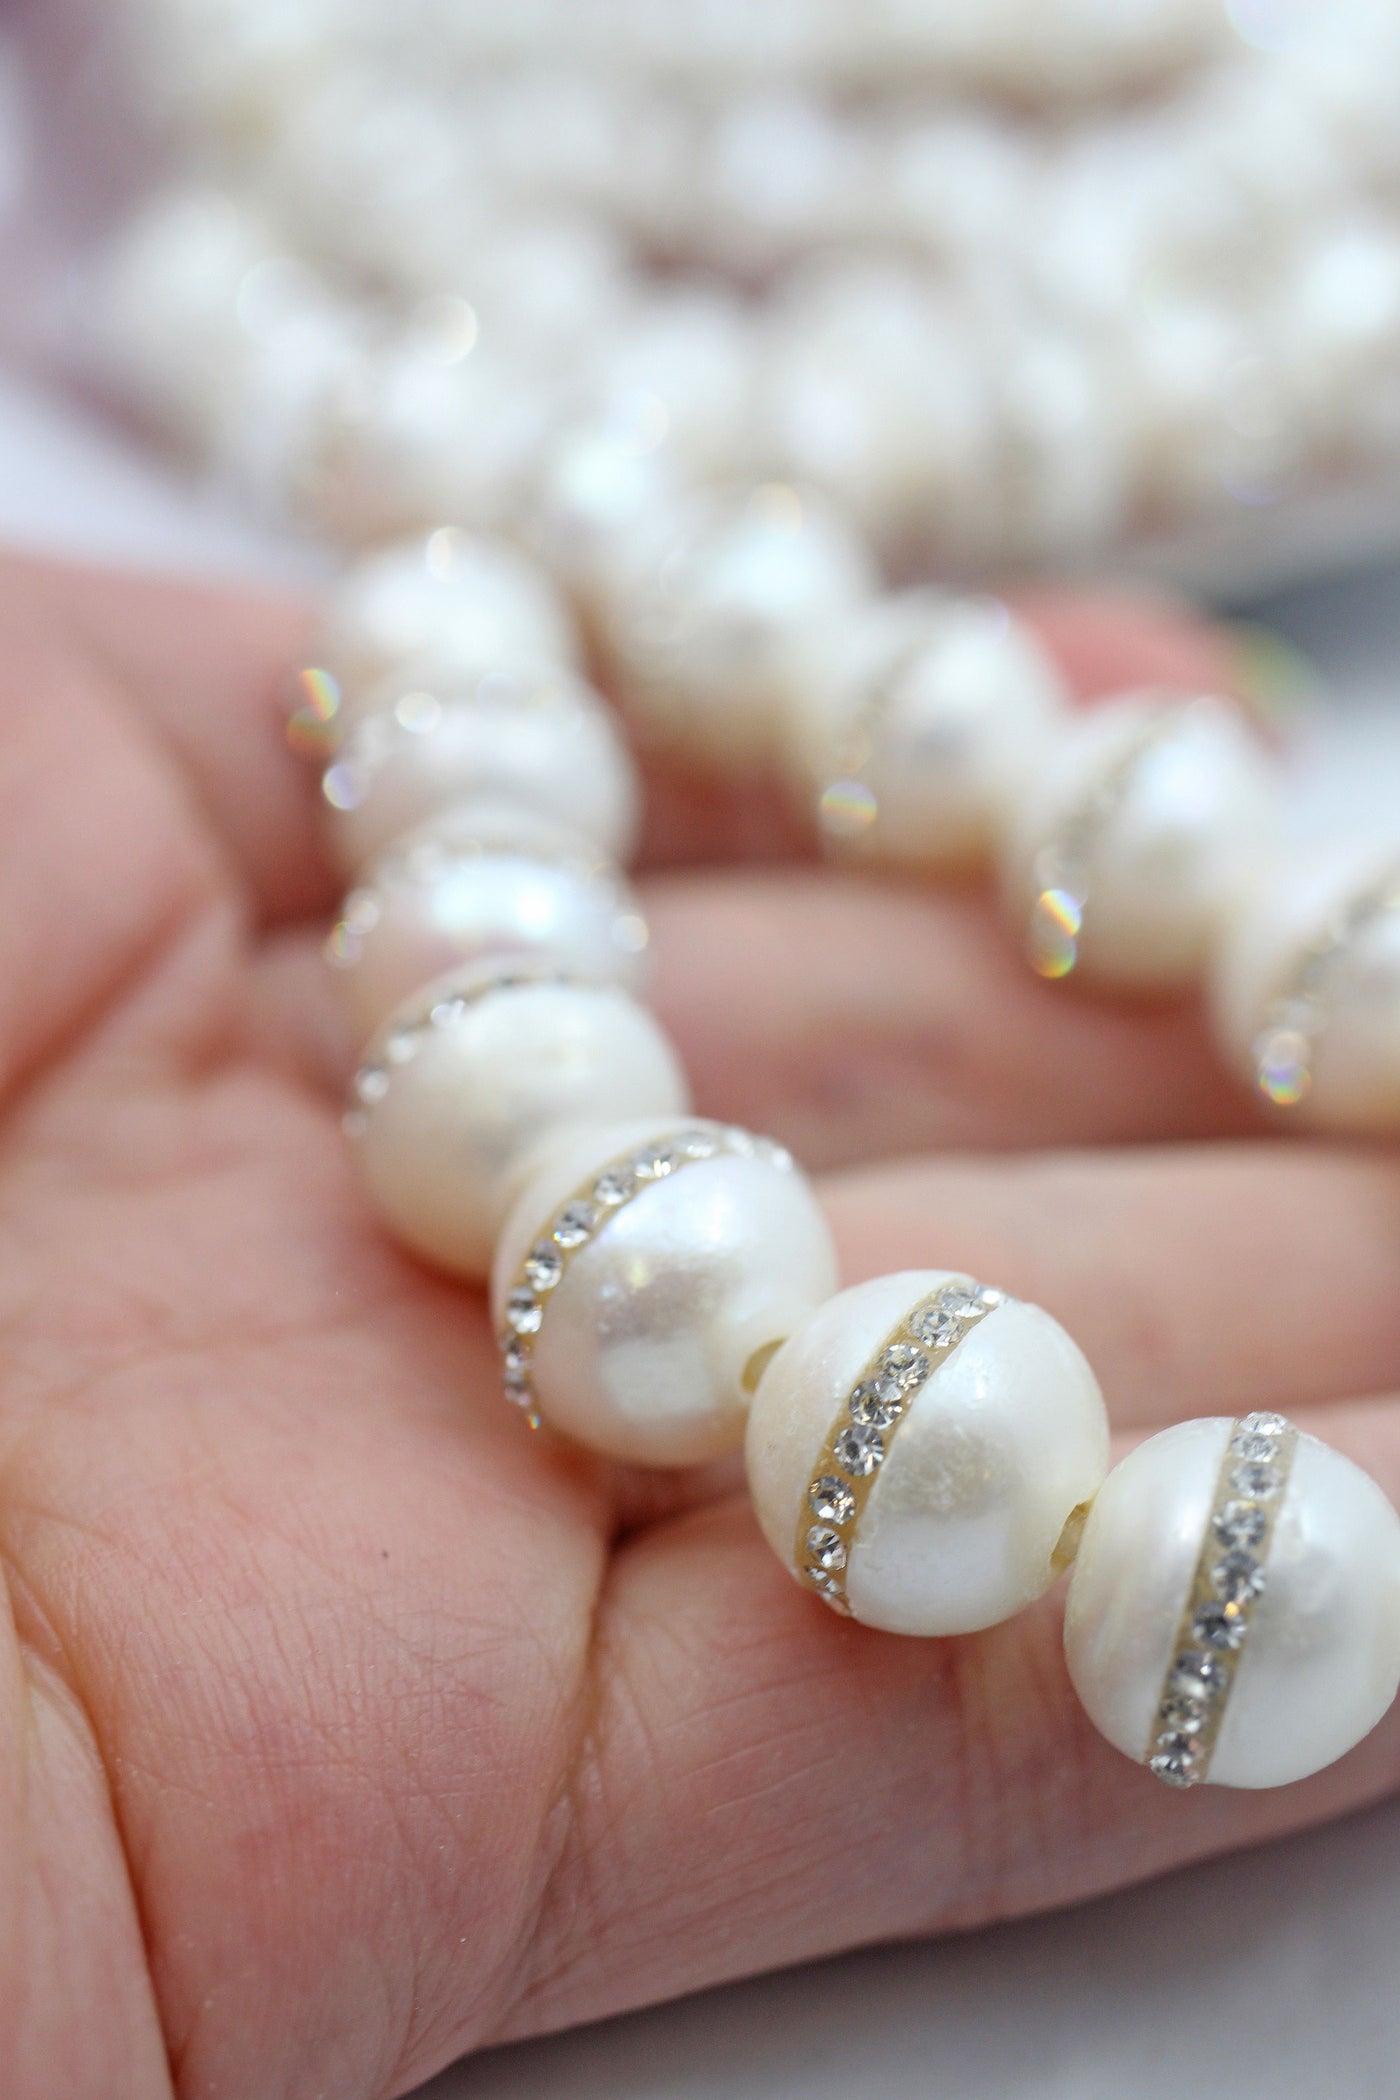 Large Hole Pearls w/ Crystal Band, 12mm, 2mm Hole, Half Strand, 18 beads